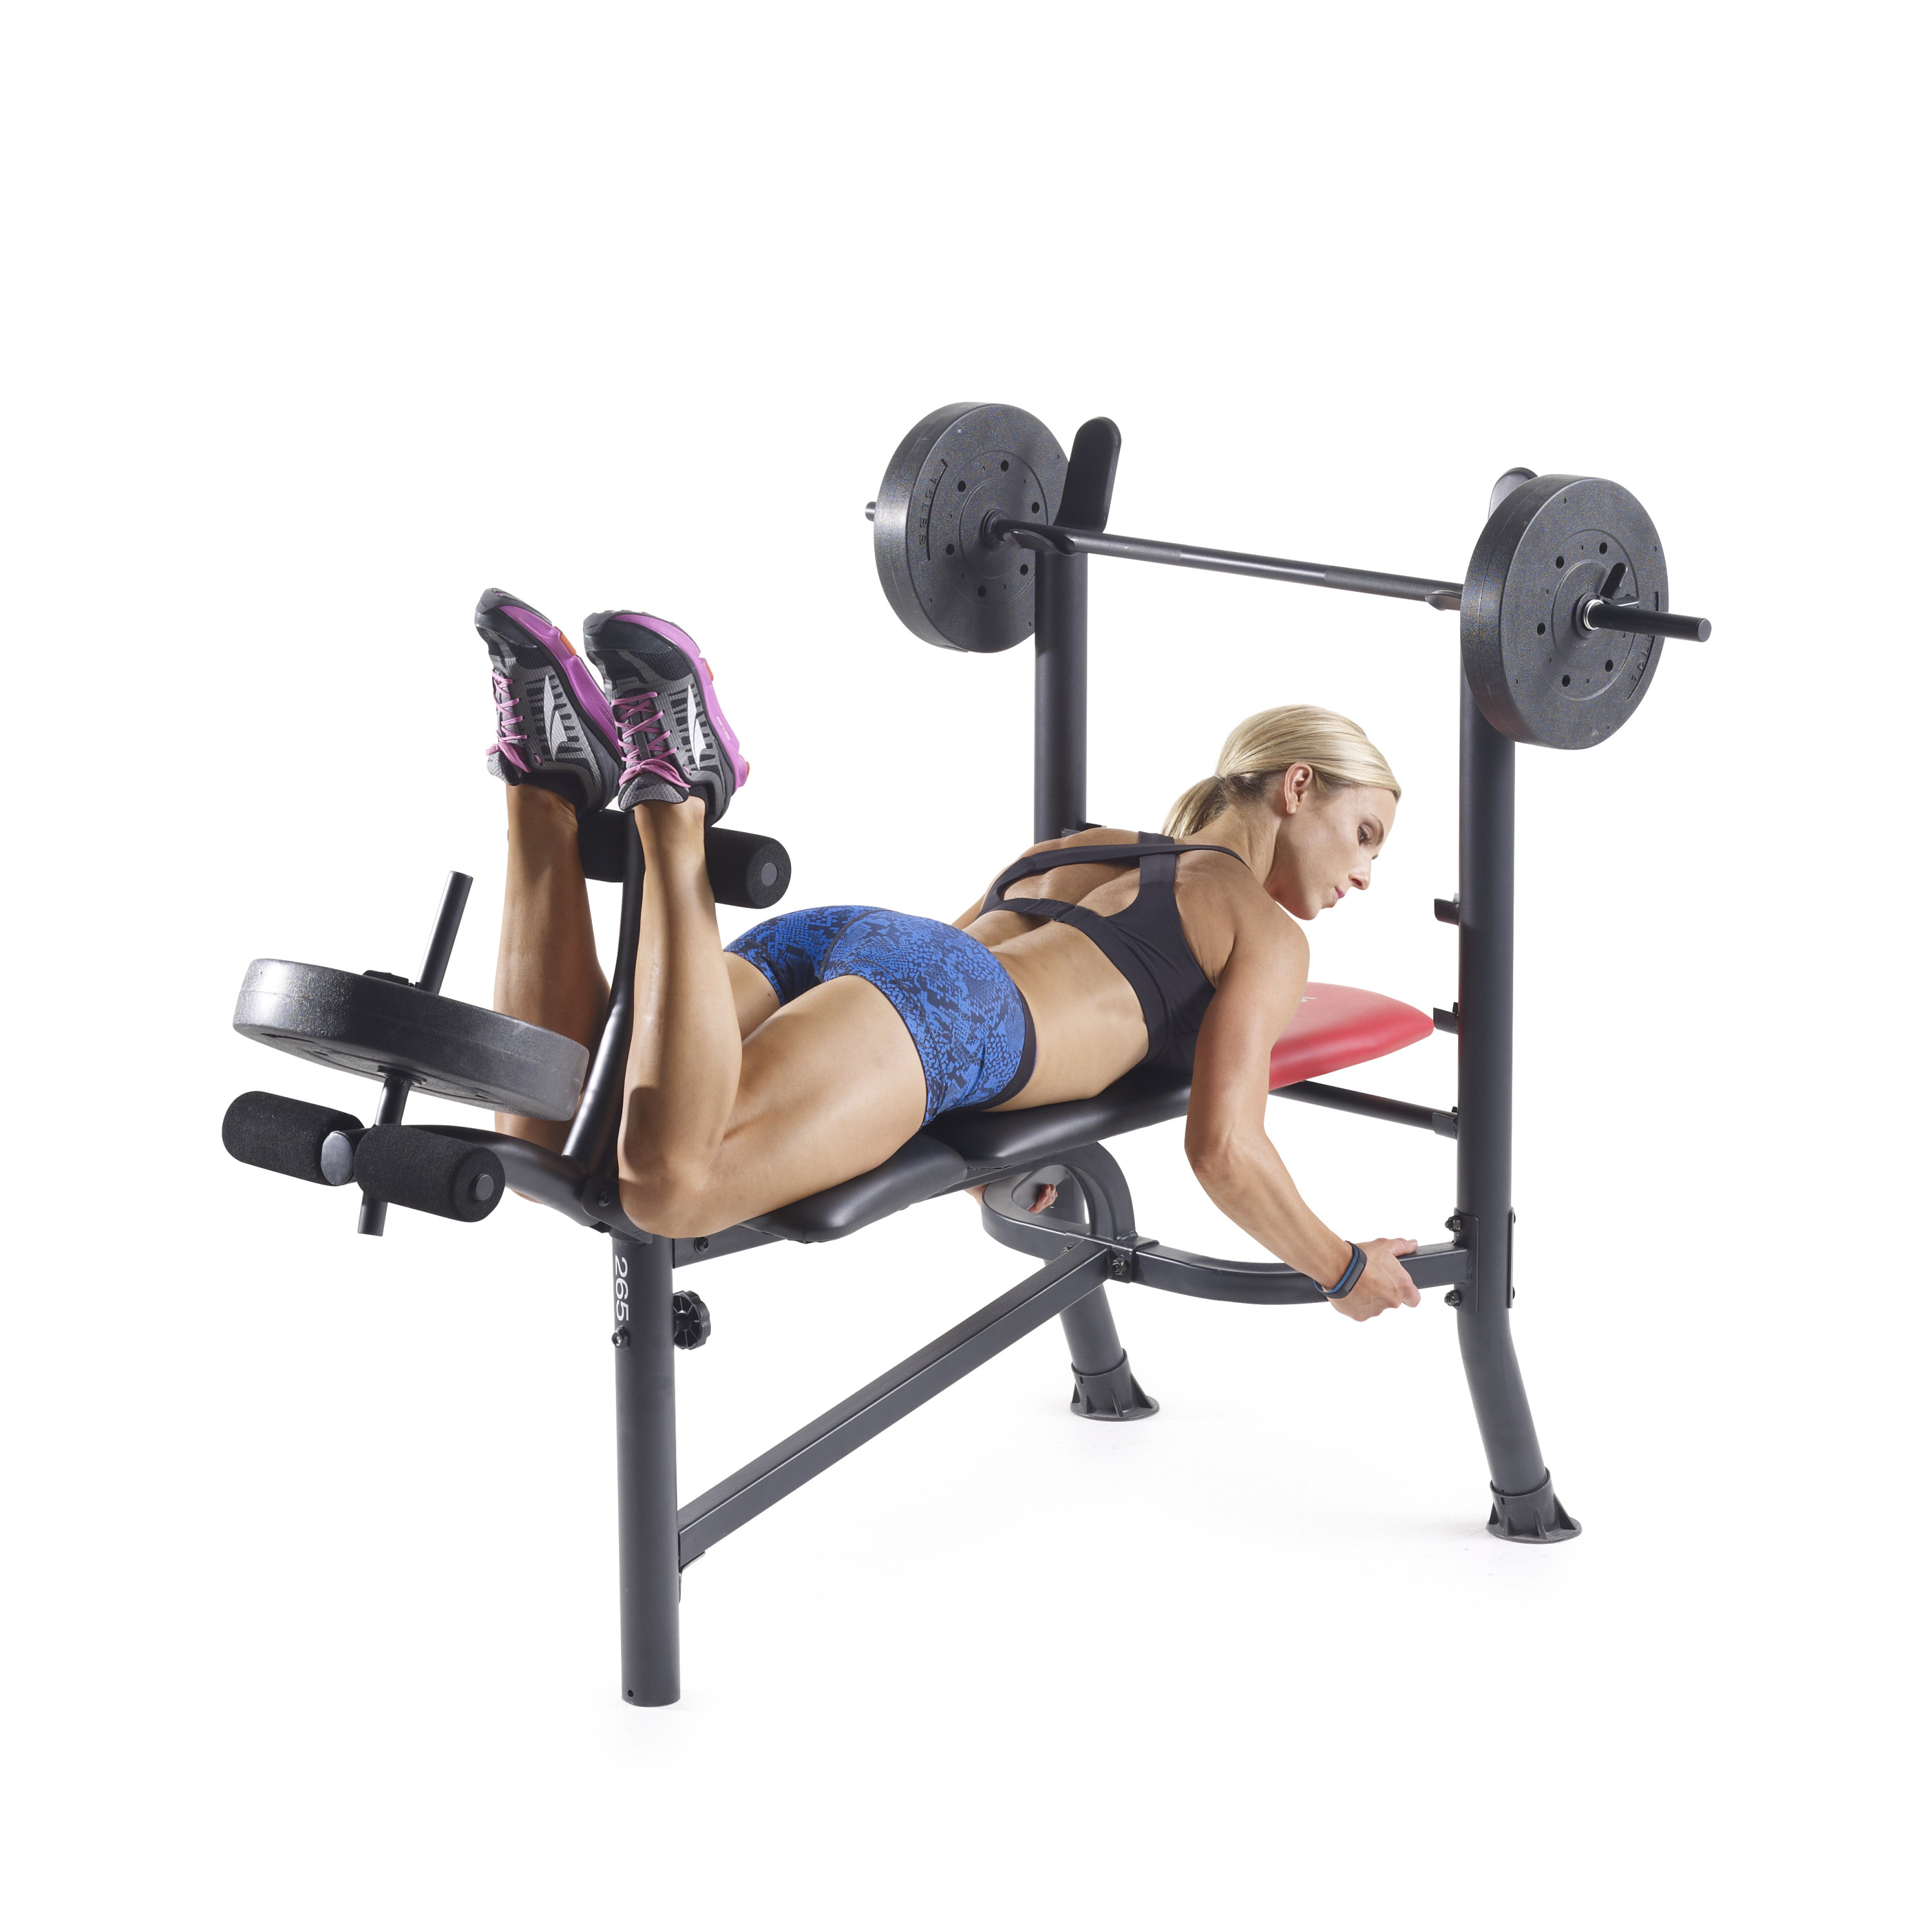 Weider Pro 265 Standard Weight Bench with 80 lb. Vinyl Weight Set - image 4 of 8